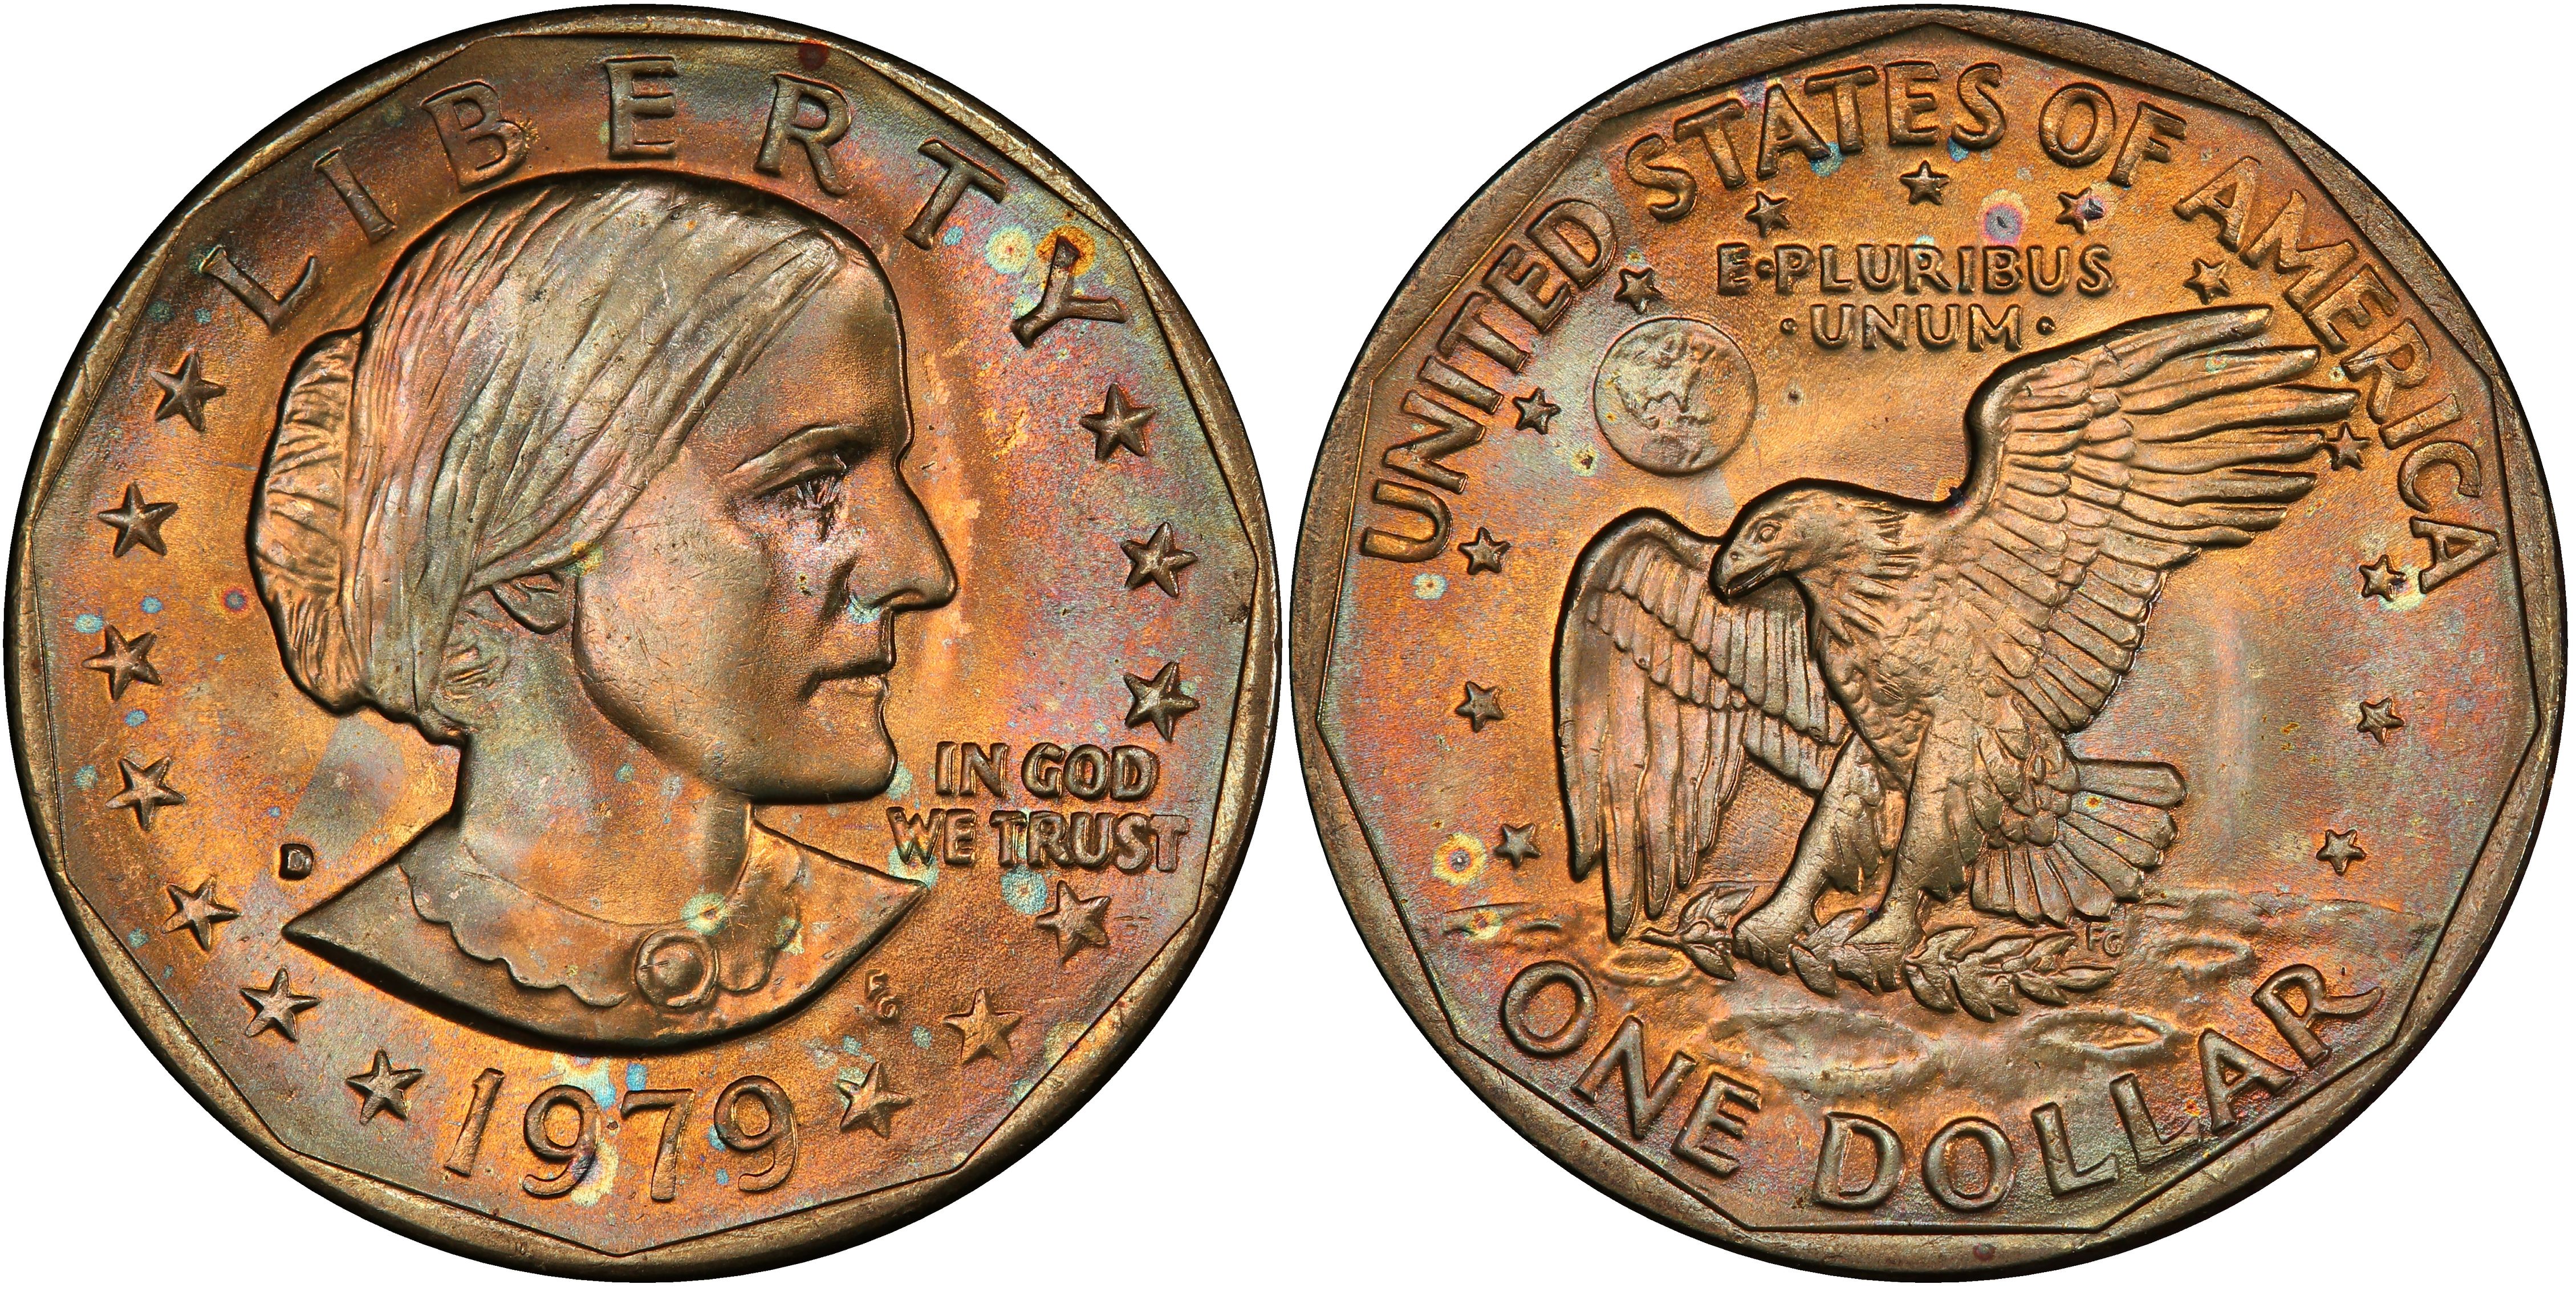 Images of Susan B. Anthony Dollar 1979-D SBA$1 - PCGS CoinFacts4518 x 2280